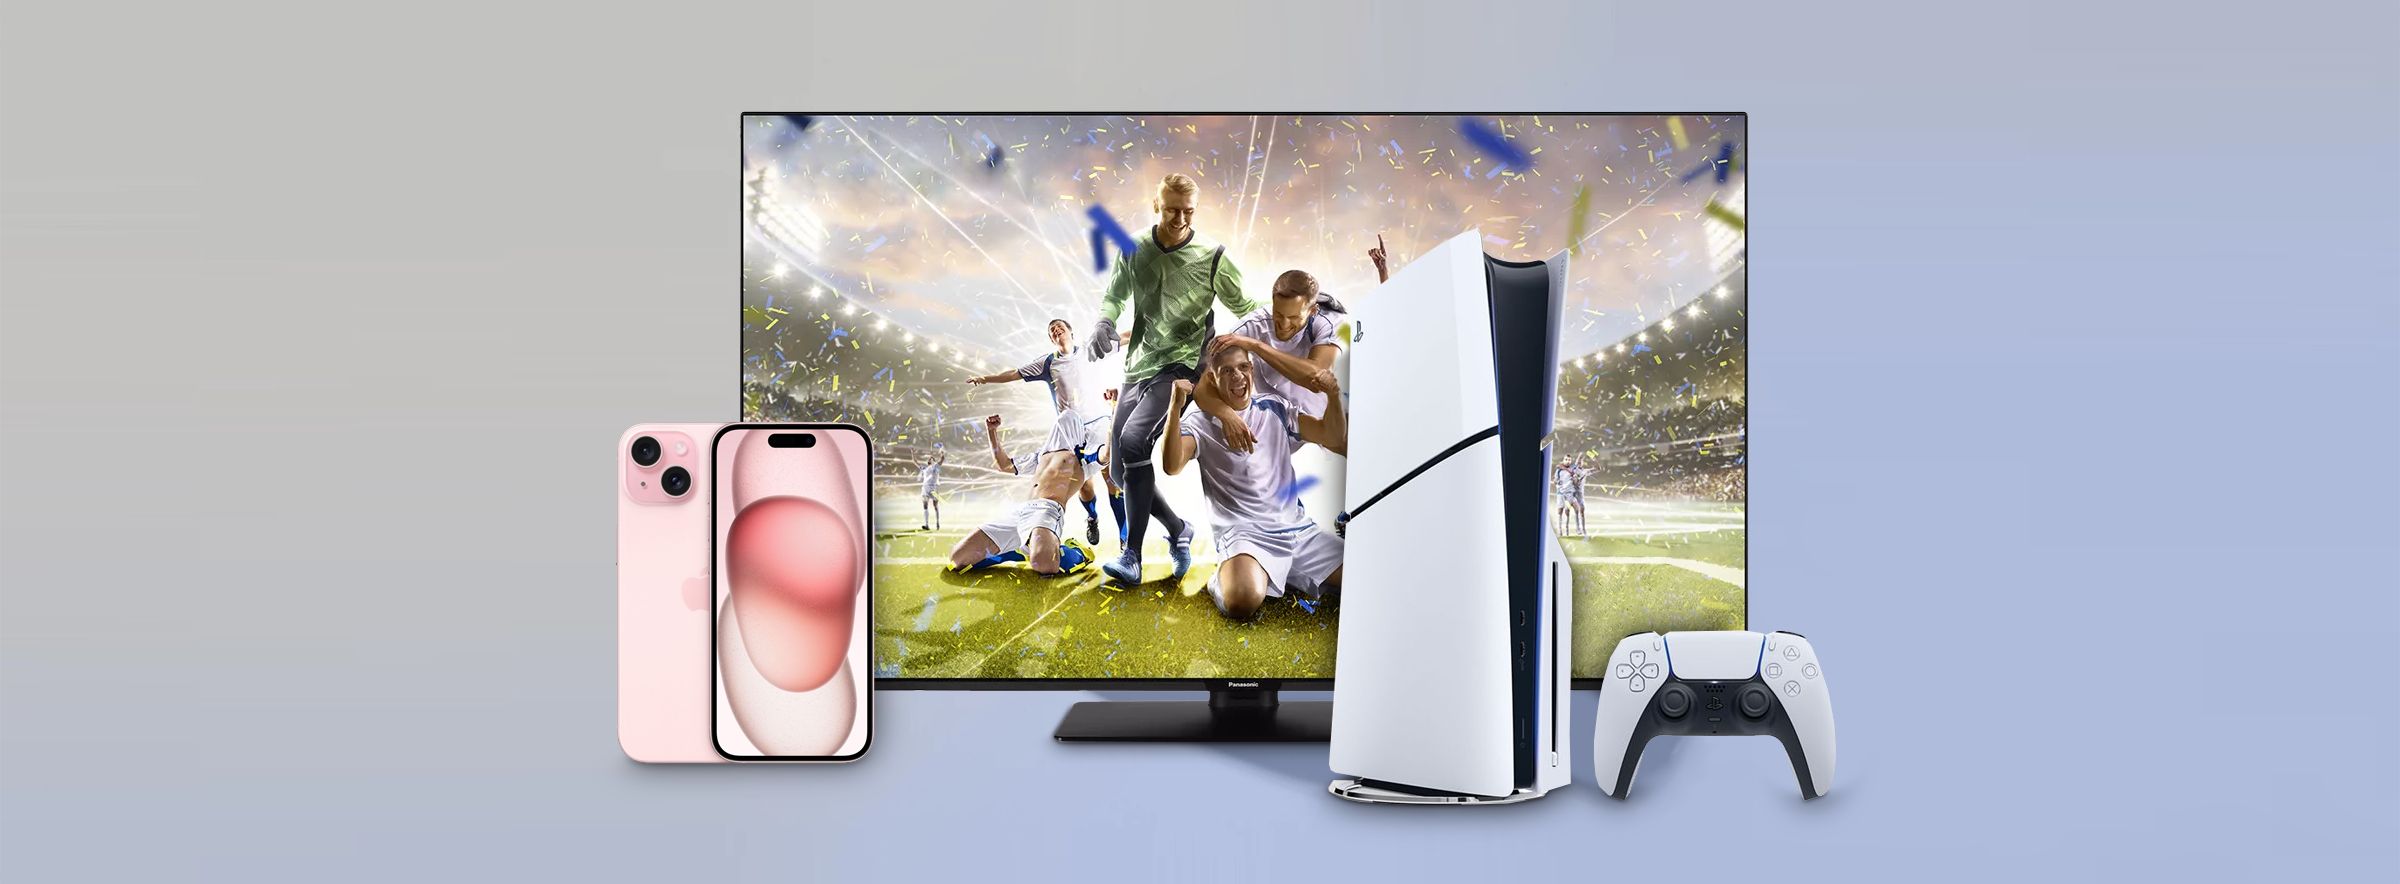 Image of a collection of Tvs, Playstation 5 and iPhone 15